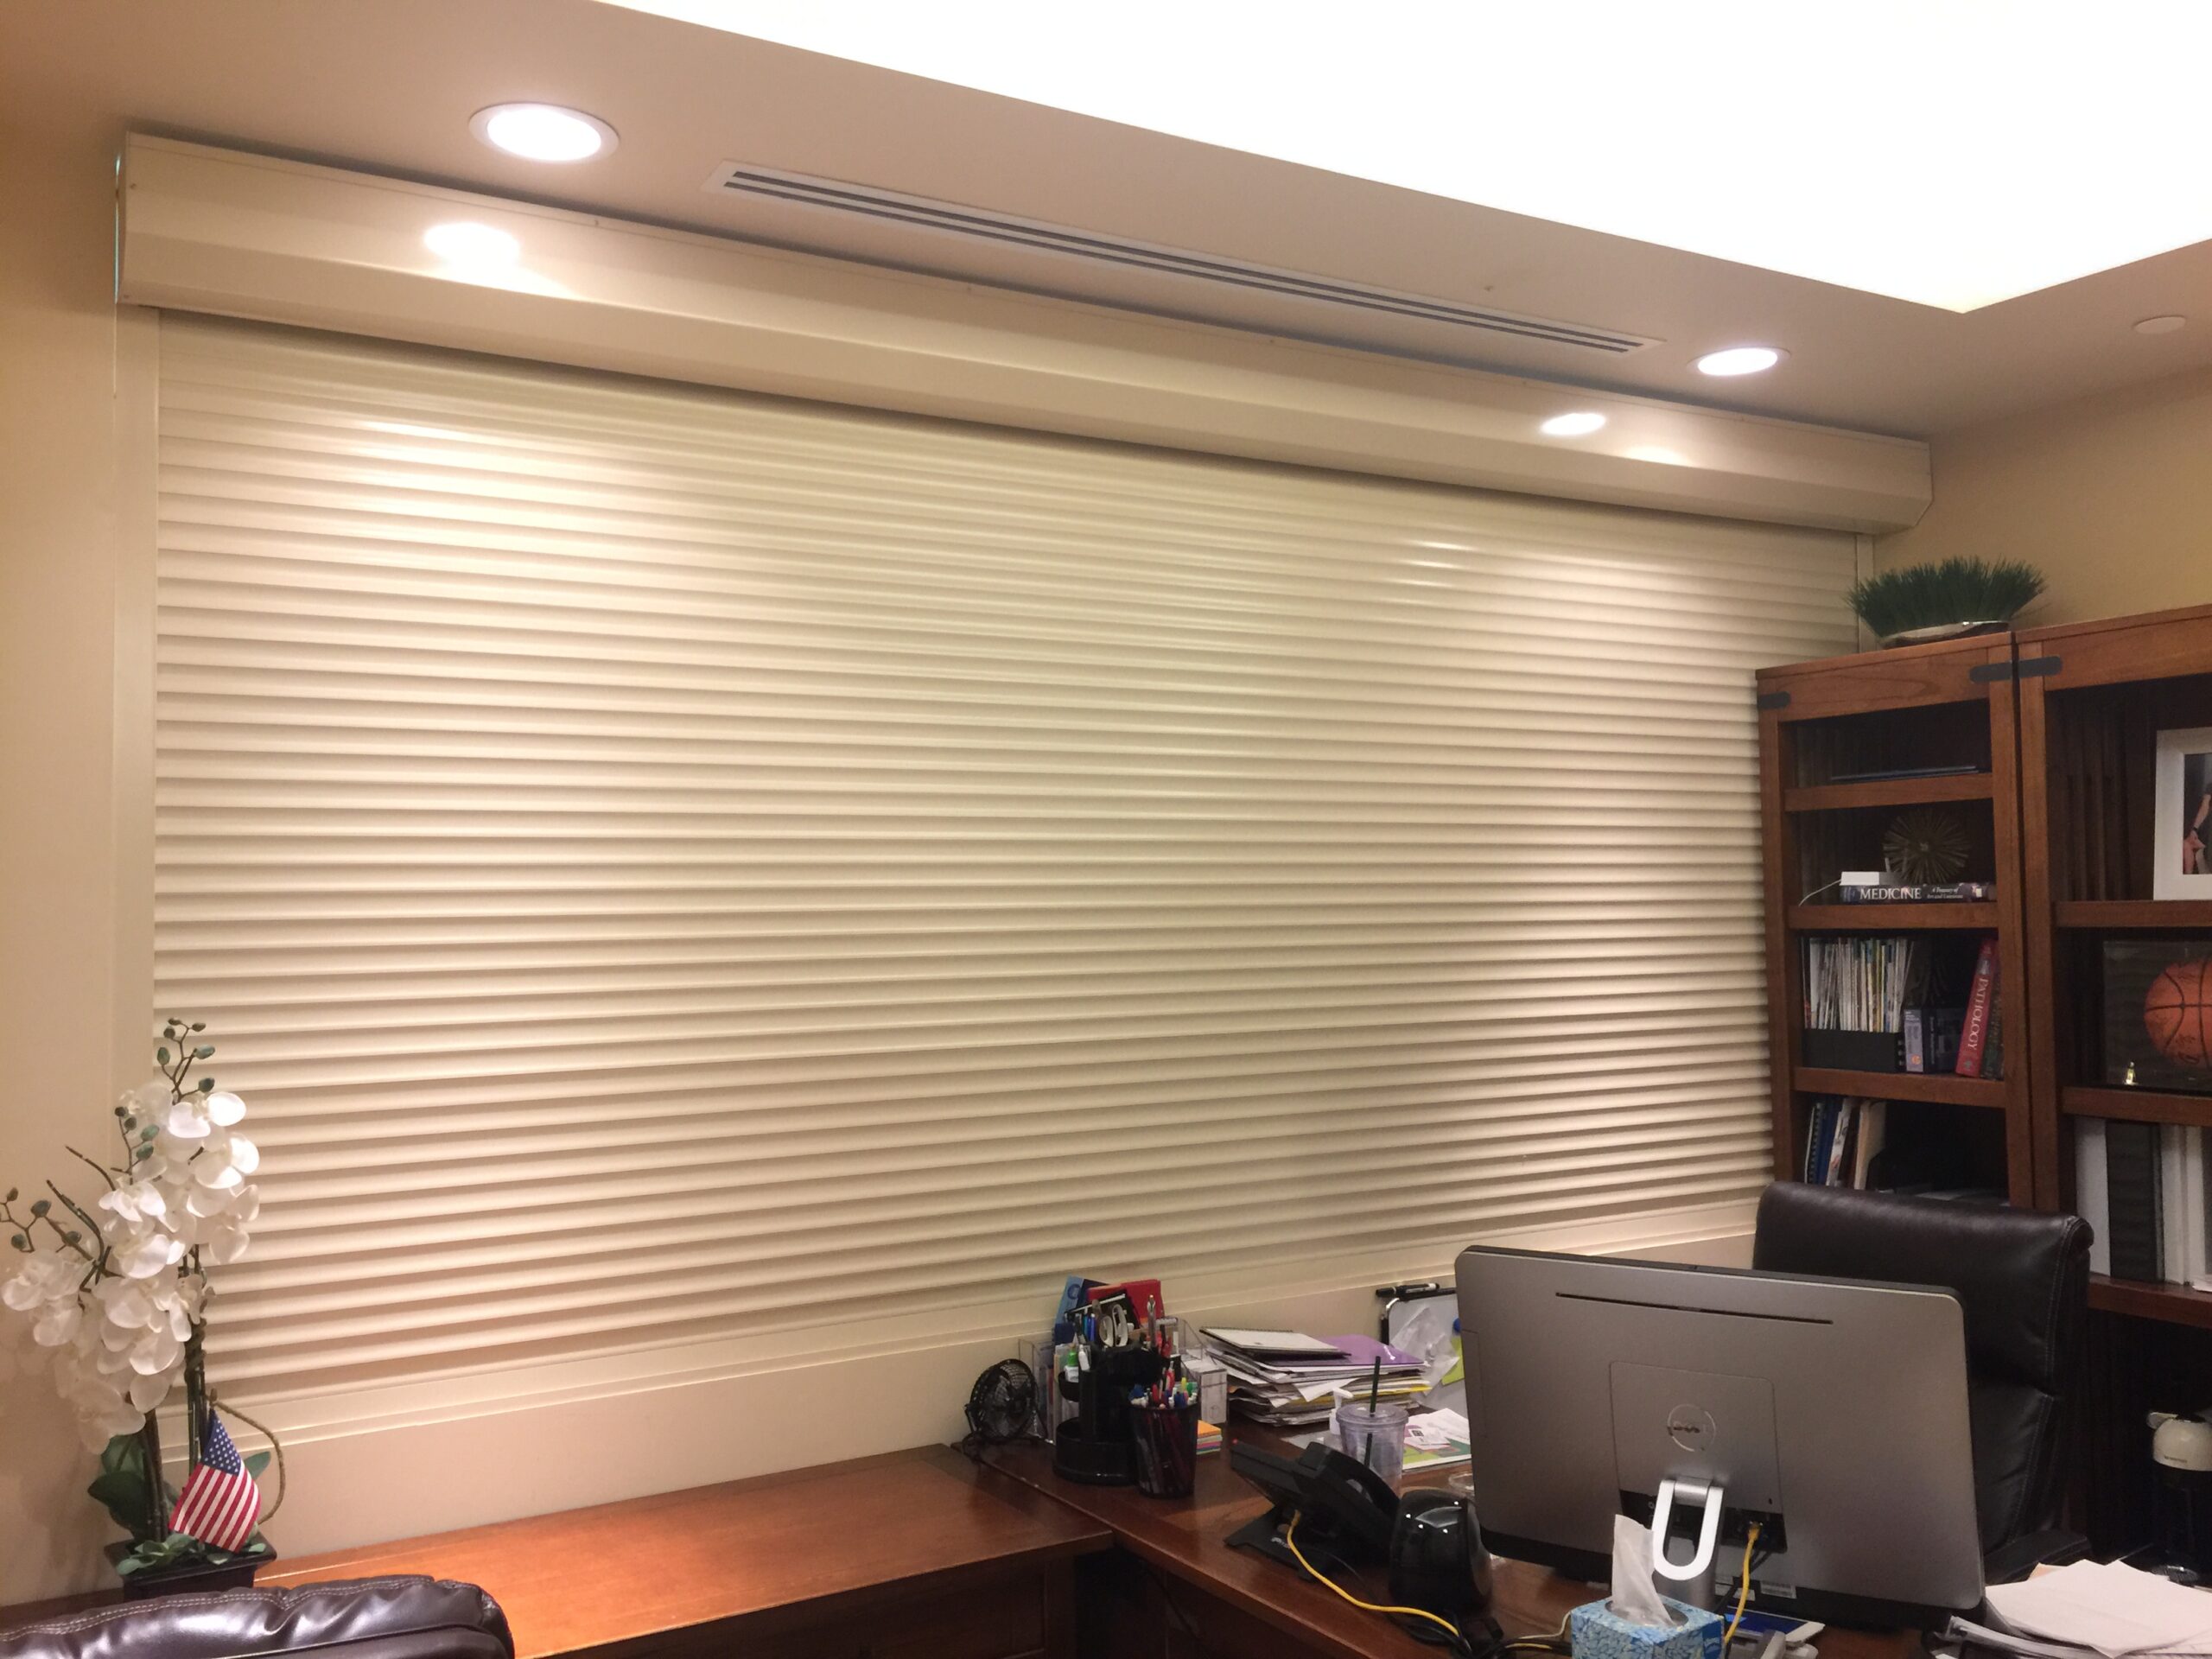 An image showing closed rolling shutters inside an office